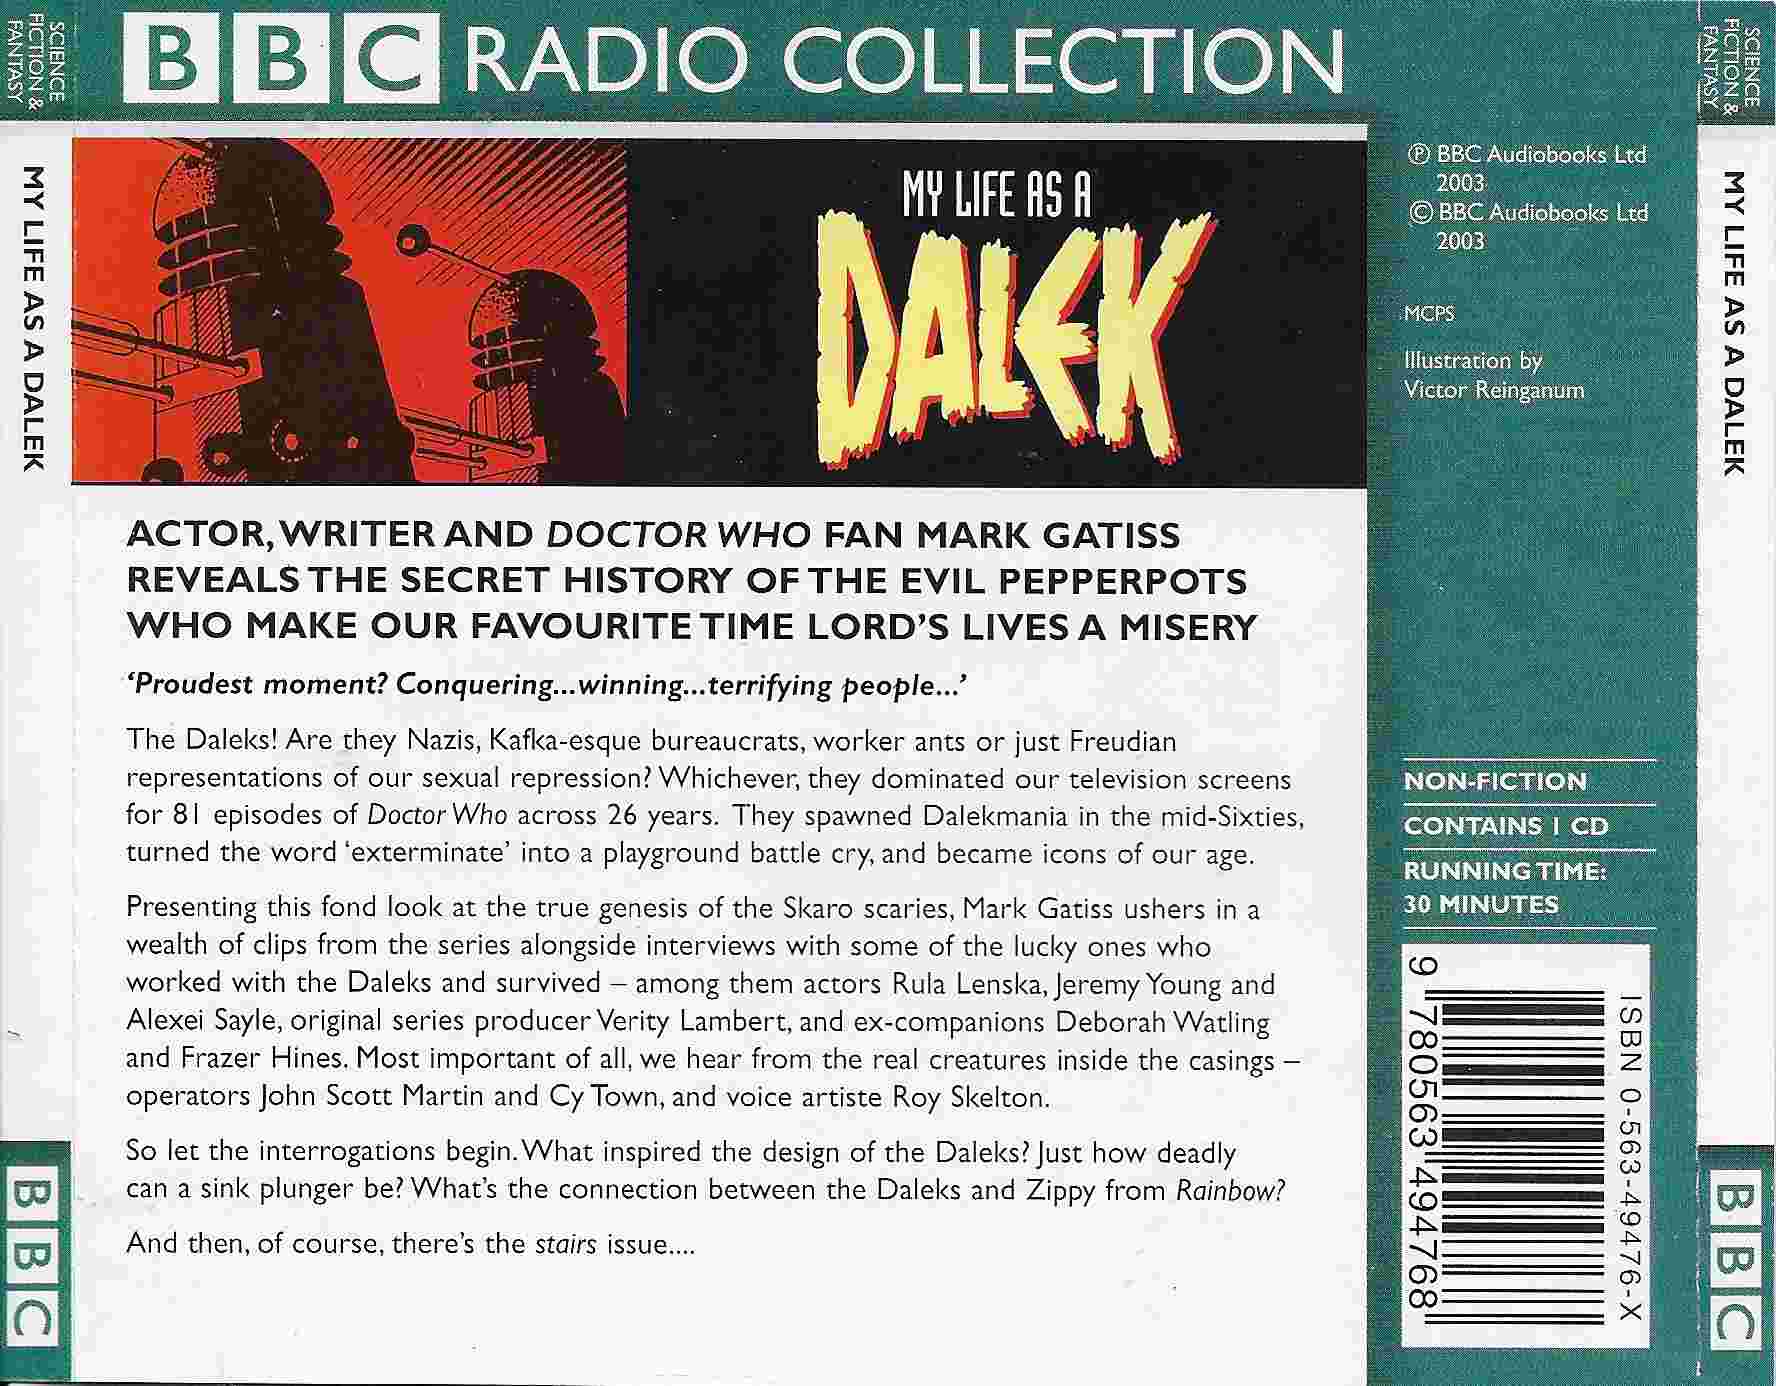 Picture of ISBN 0-563-49476-X3 Doctor Who - My Life as a Dalek by artist Mark Gatiss from the BBC records and Tapes library